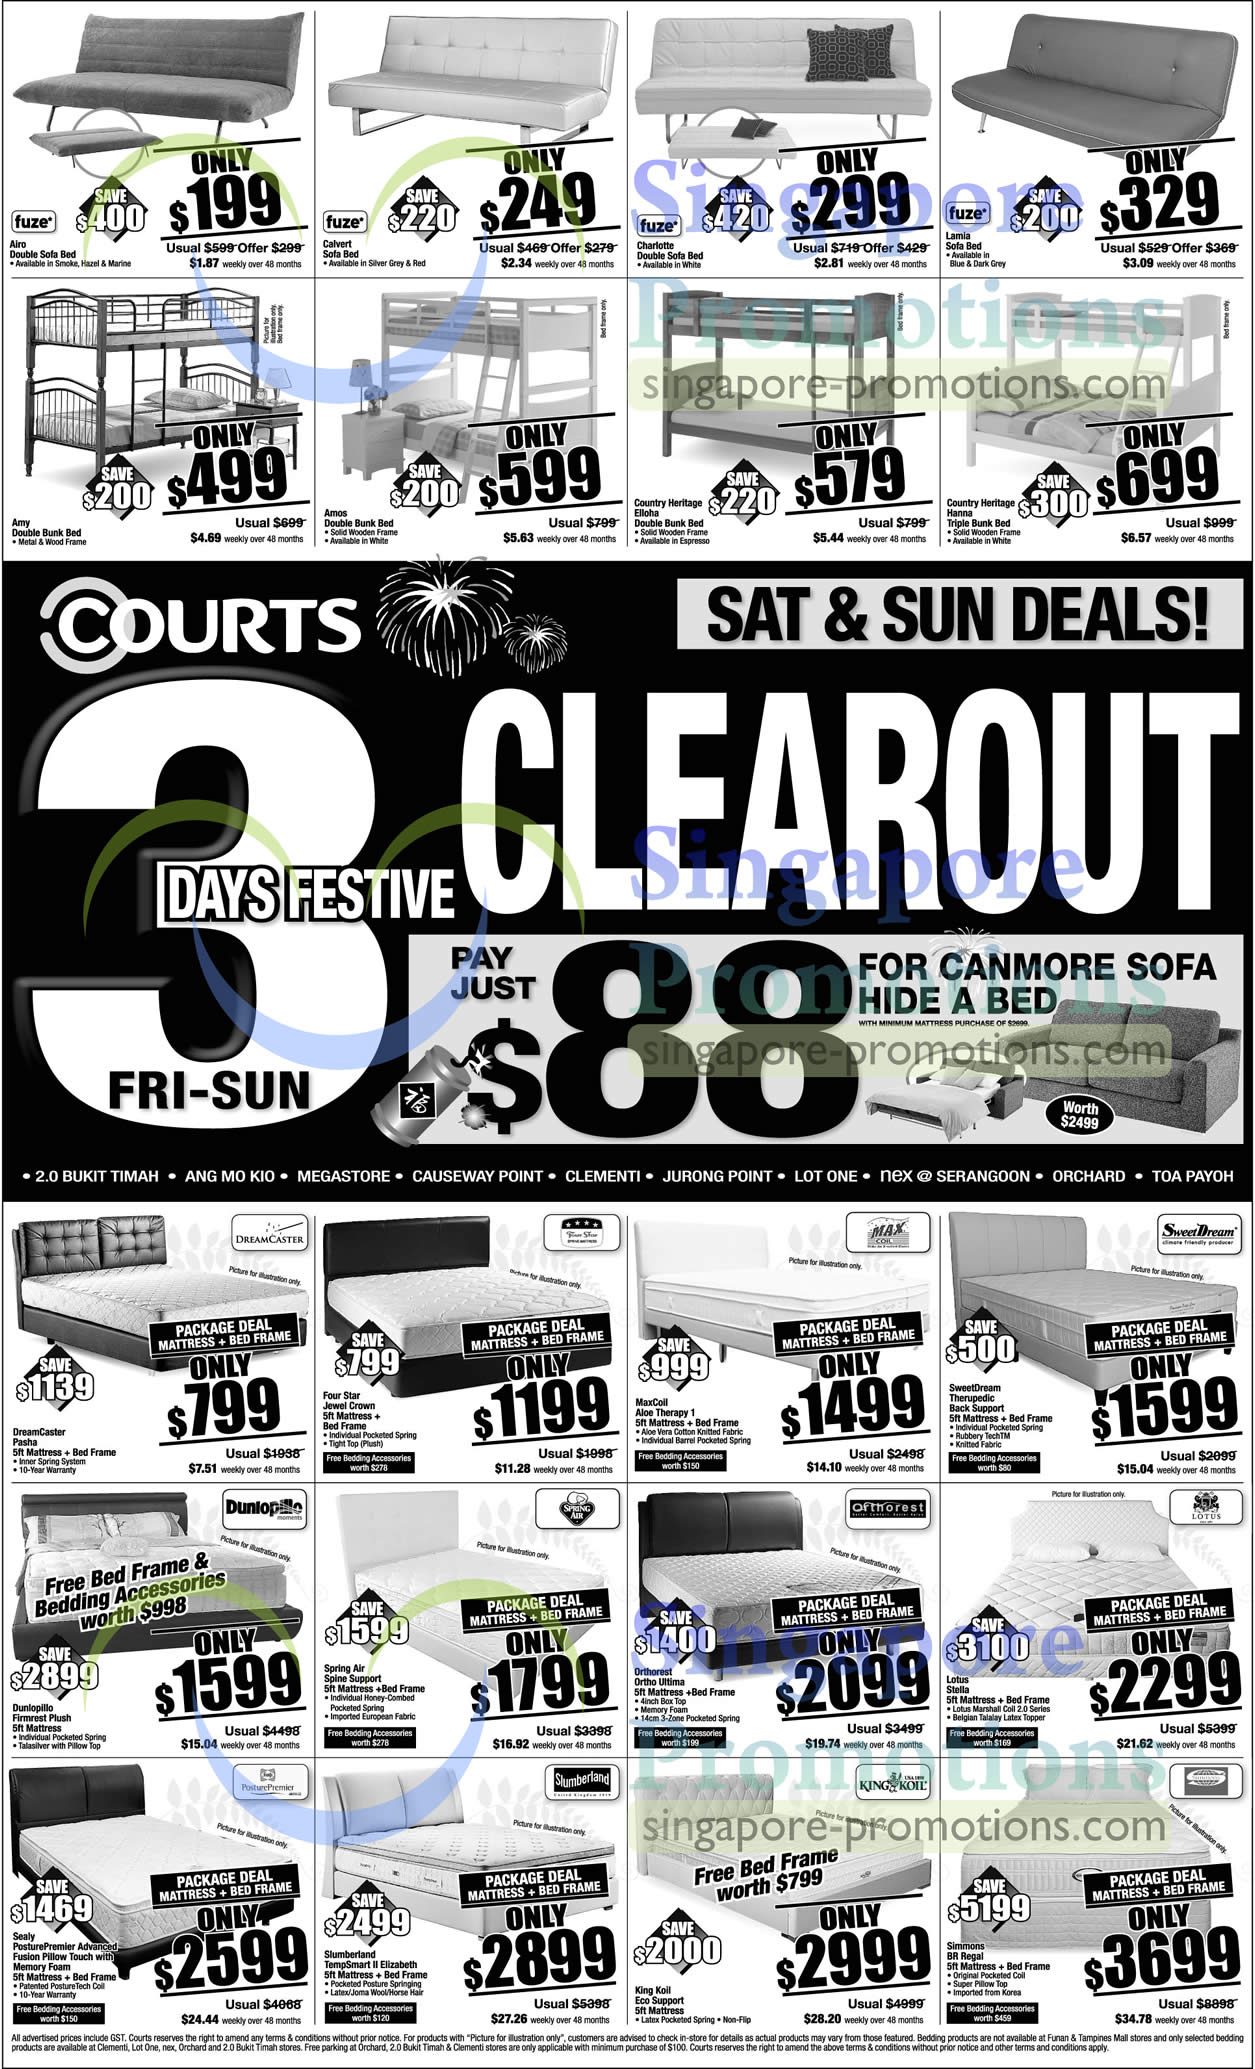 Featured image for Courts 3 Days Festive Clear Out Promotion 1 - 3 Feb 2013